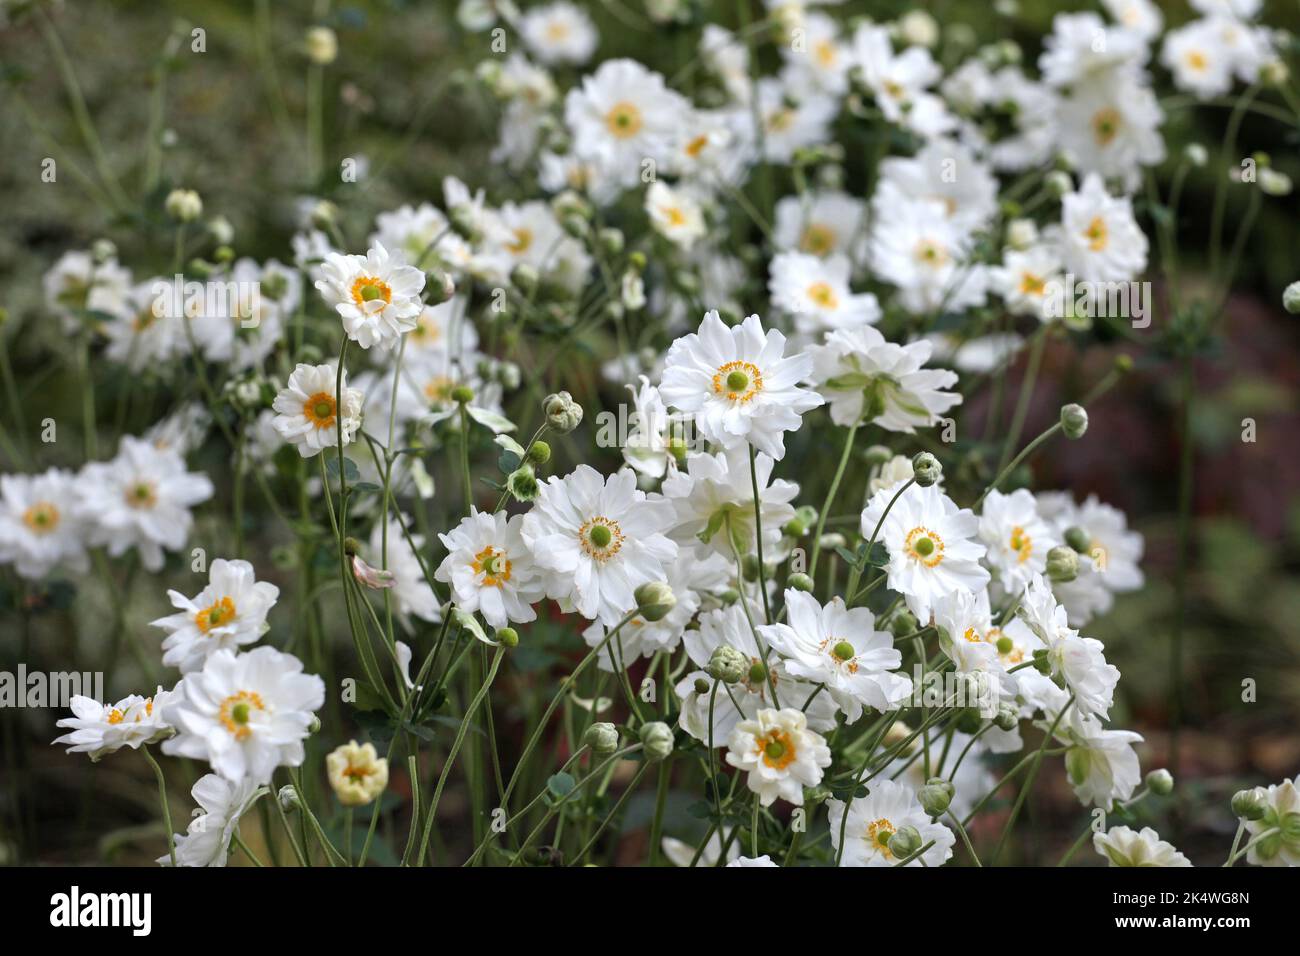 Japanese anemone 'Whirlwind' in flower. Stock Photo